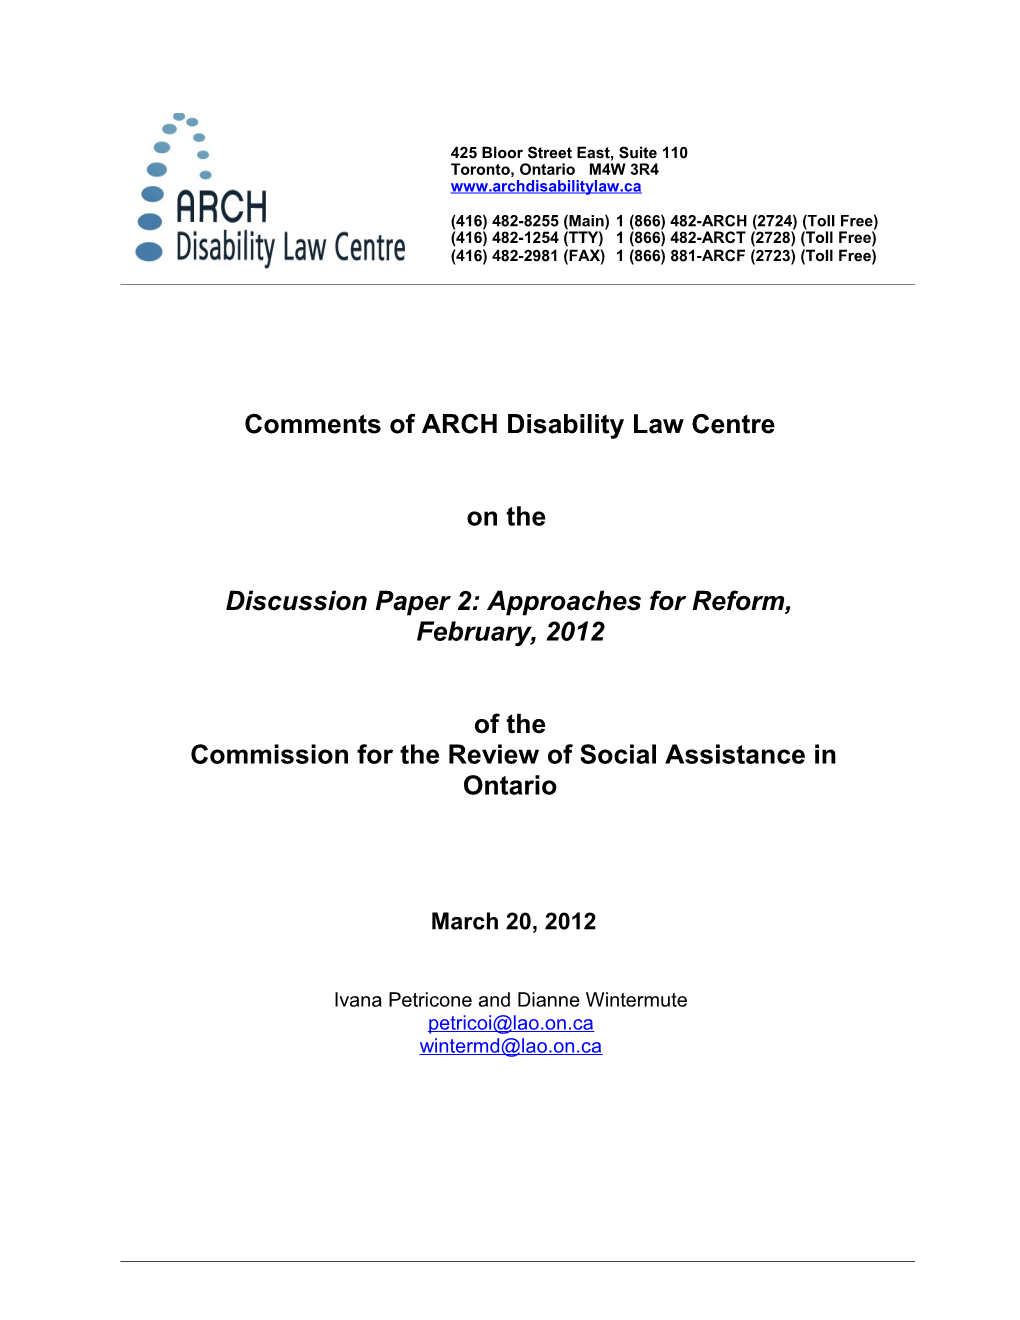 Comments of ARCH Disability Law Centre On